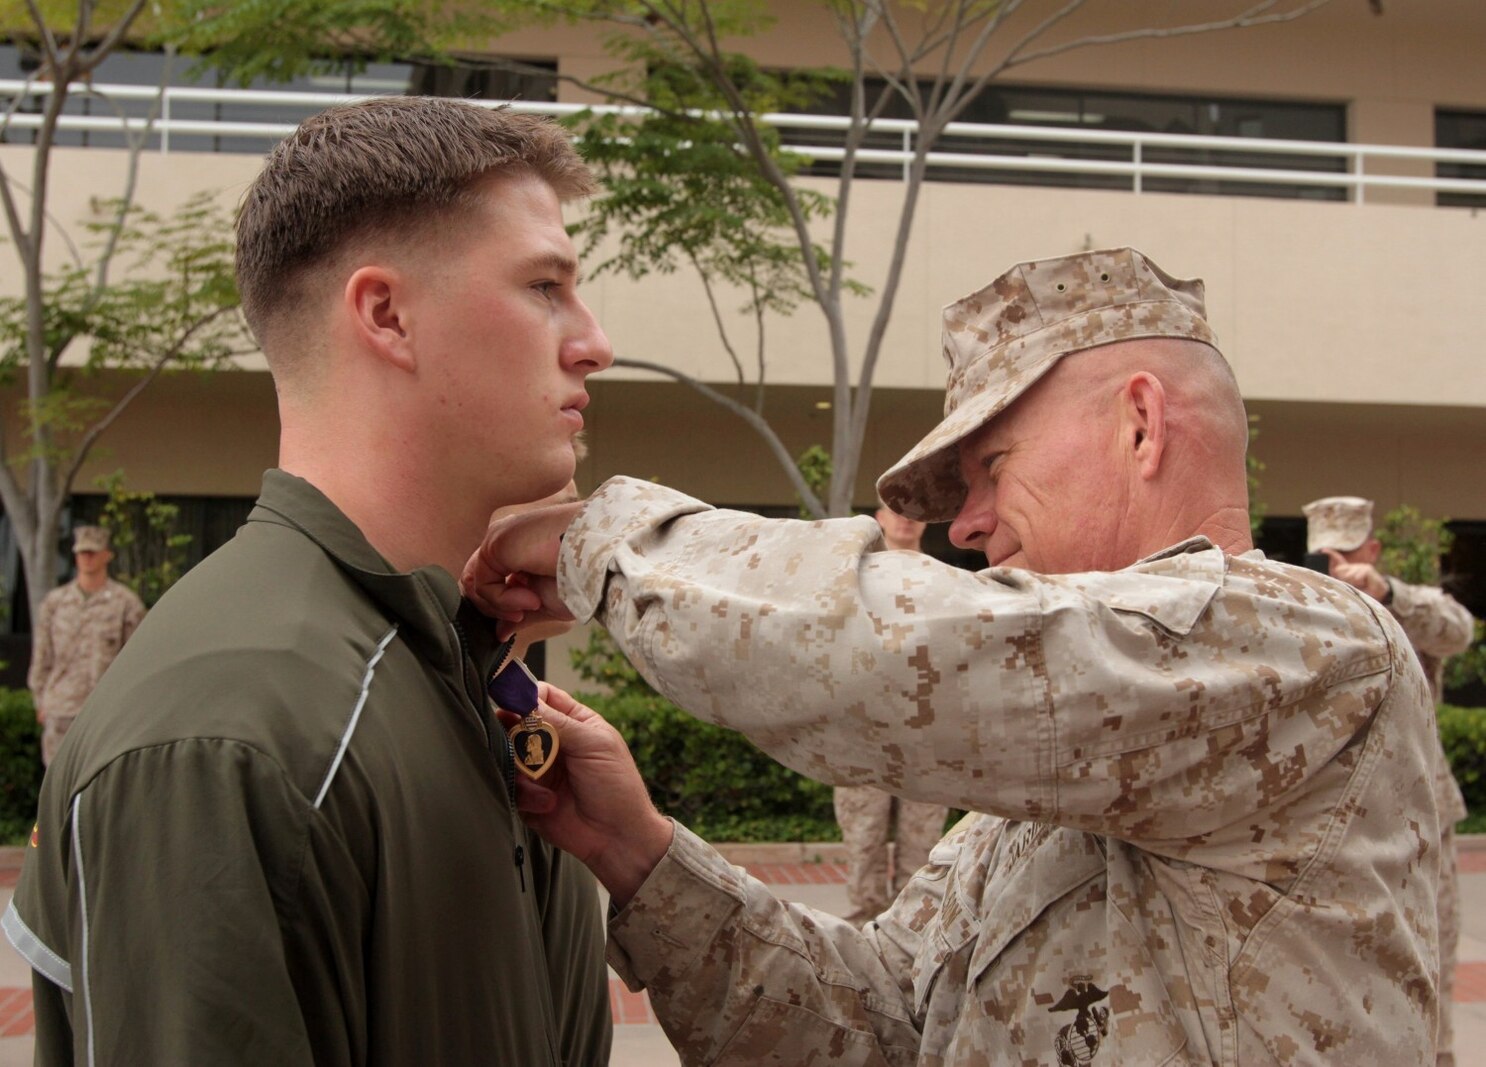 NAVAL MEDICAL CENTER SAN DIEGO, Calif. – Major Gen. Lawrence D. Nicholson, 1st Marine Division commanding general, presents the Purple Heart to Cpl. Matthew S. Babler, a rifleman temporarily assigned to Wounded Warrior Battalion West, during an award ceremony here, July 31, 2013. Babler, a native of Monticello, Wisc., was wounded by enemy sniper fire, July 2, 2013, while deployed with 3rd Battalion, 4th Marine Regiment, to Musa Qal’ah district, Helmand province, Afghanistan, in support of Operation Enduring Freedom. Babler is a 2009 graduate of Monticello High School. 
(U.S. Marine Corps photo by Sgt. Jacob H. Harrer)